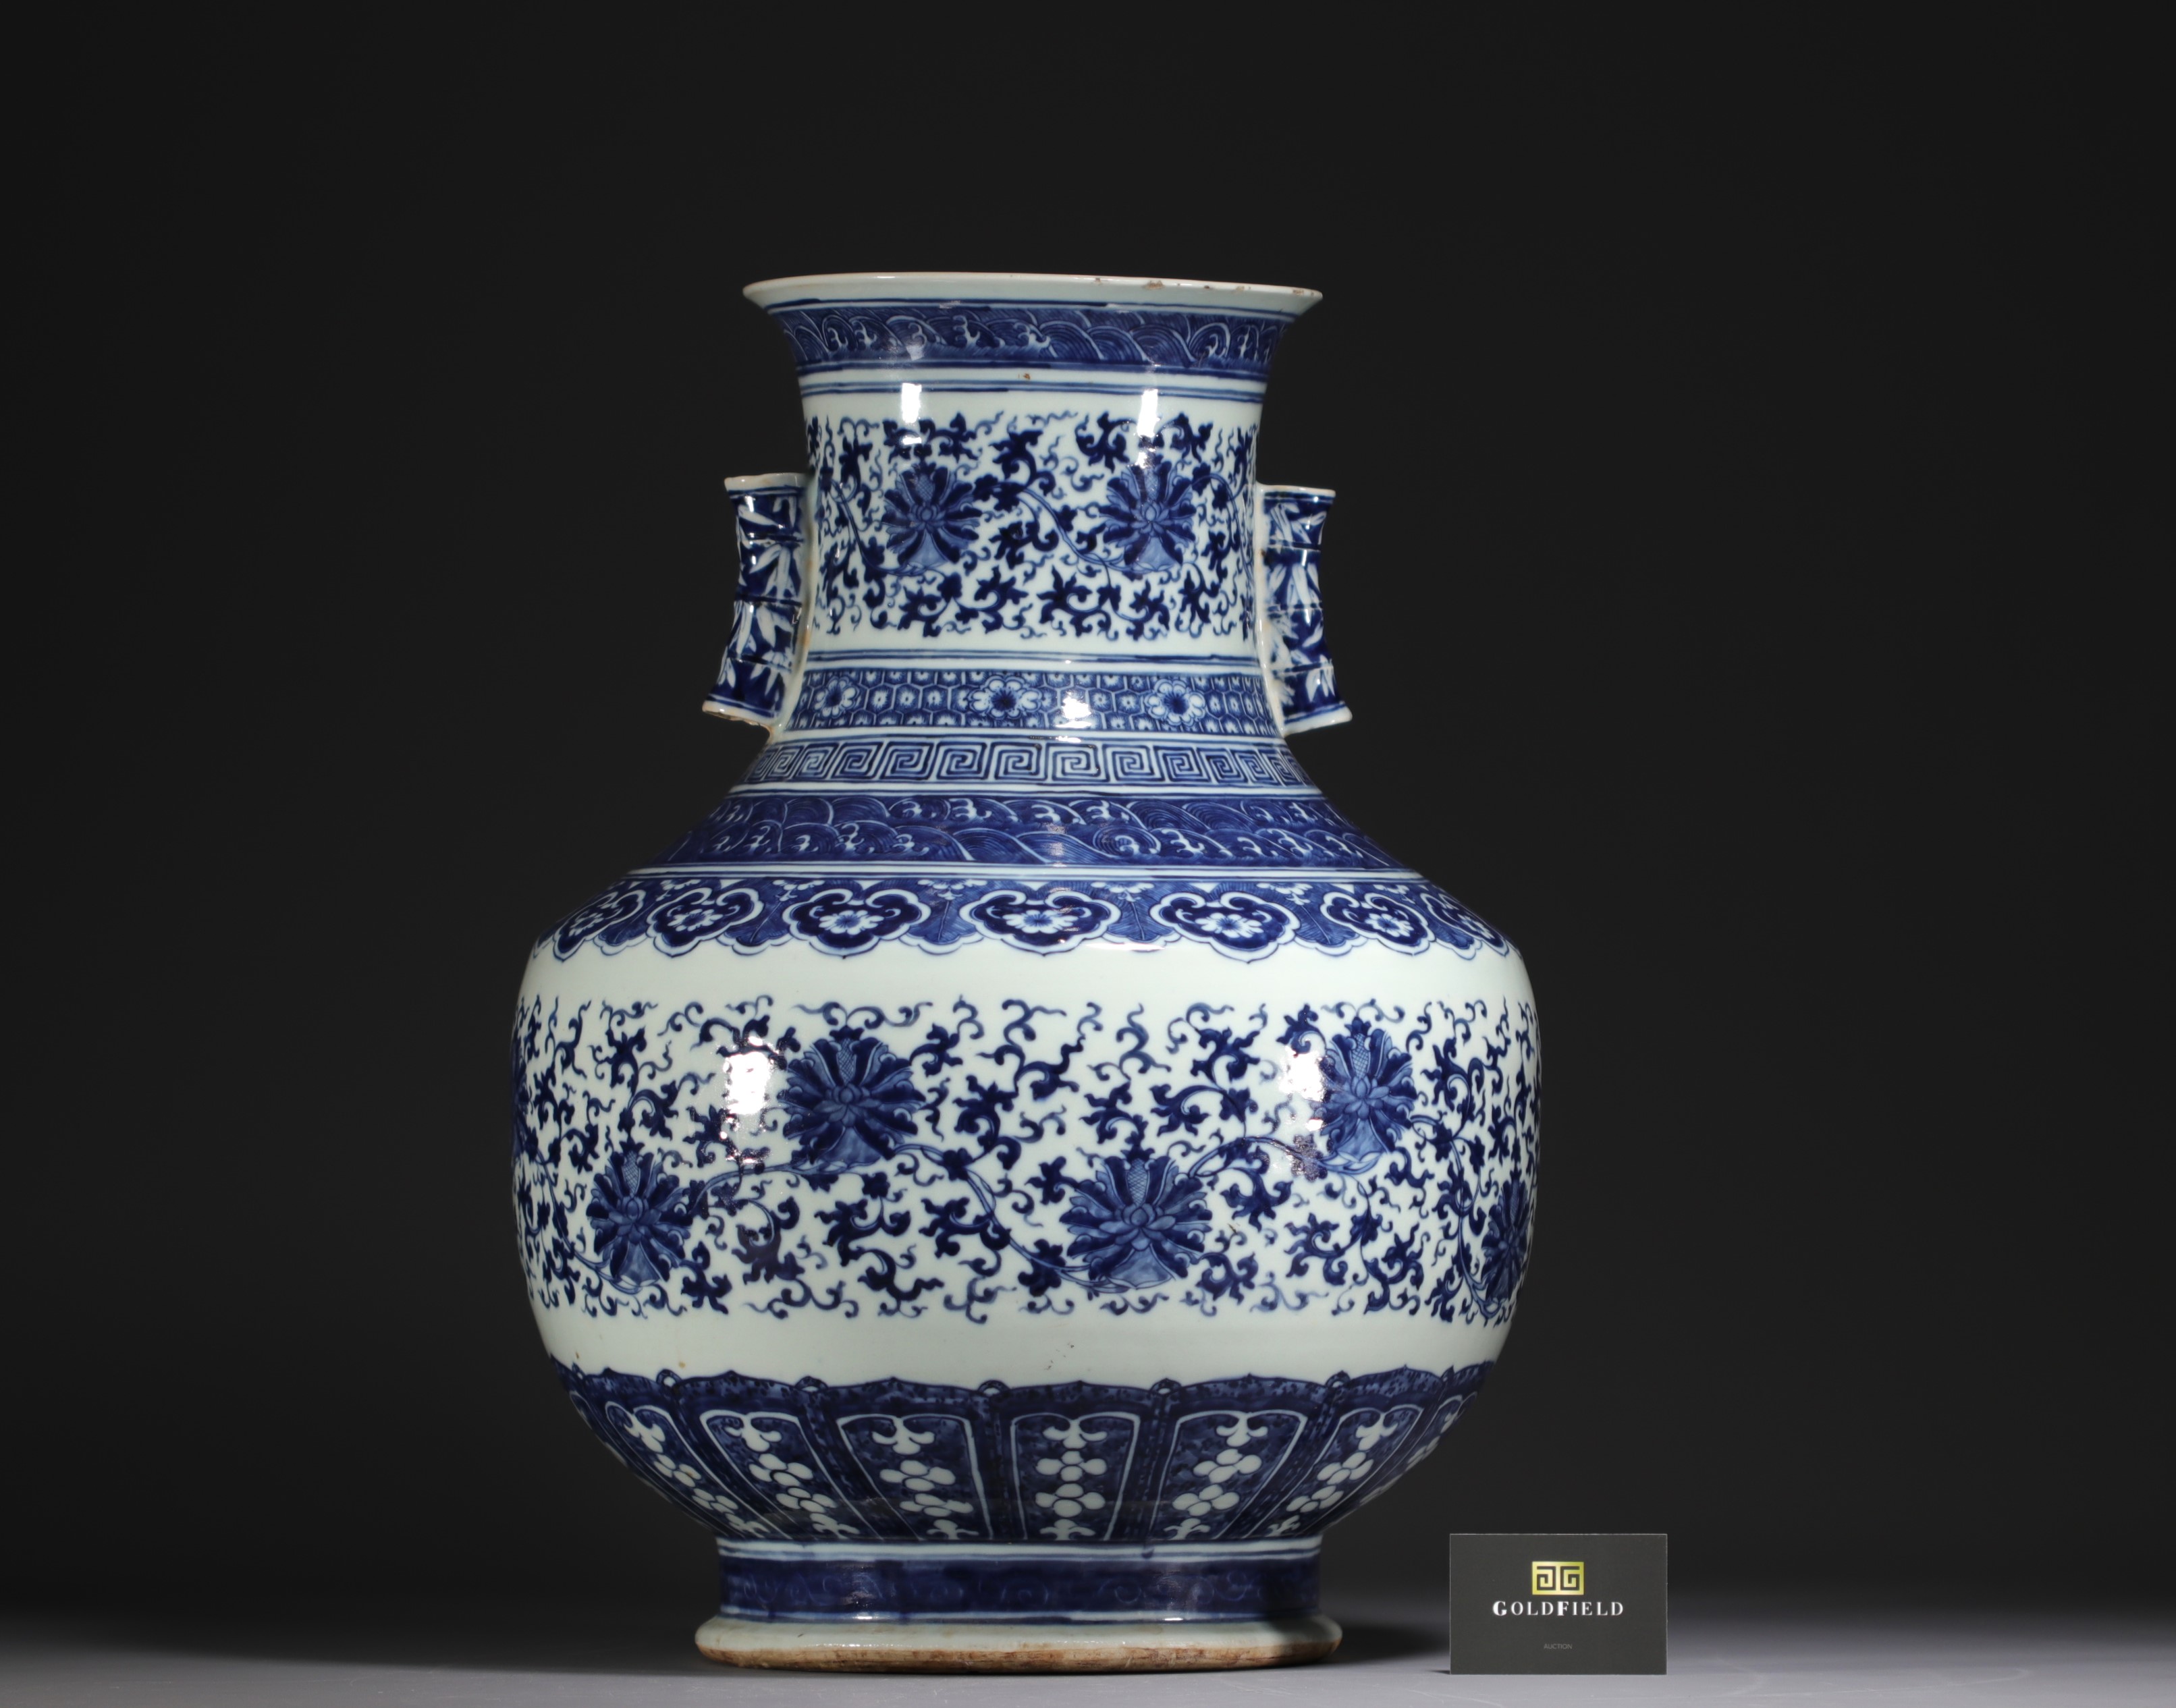 China - Large Hu-shaped vase in blue-white porcelain with floral decoration and bamboo handles, 19th